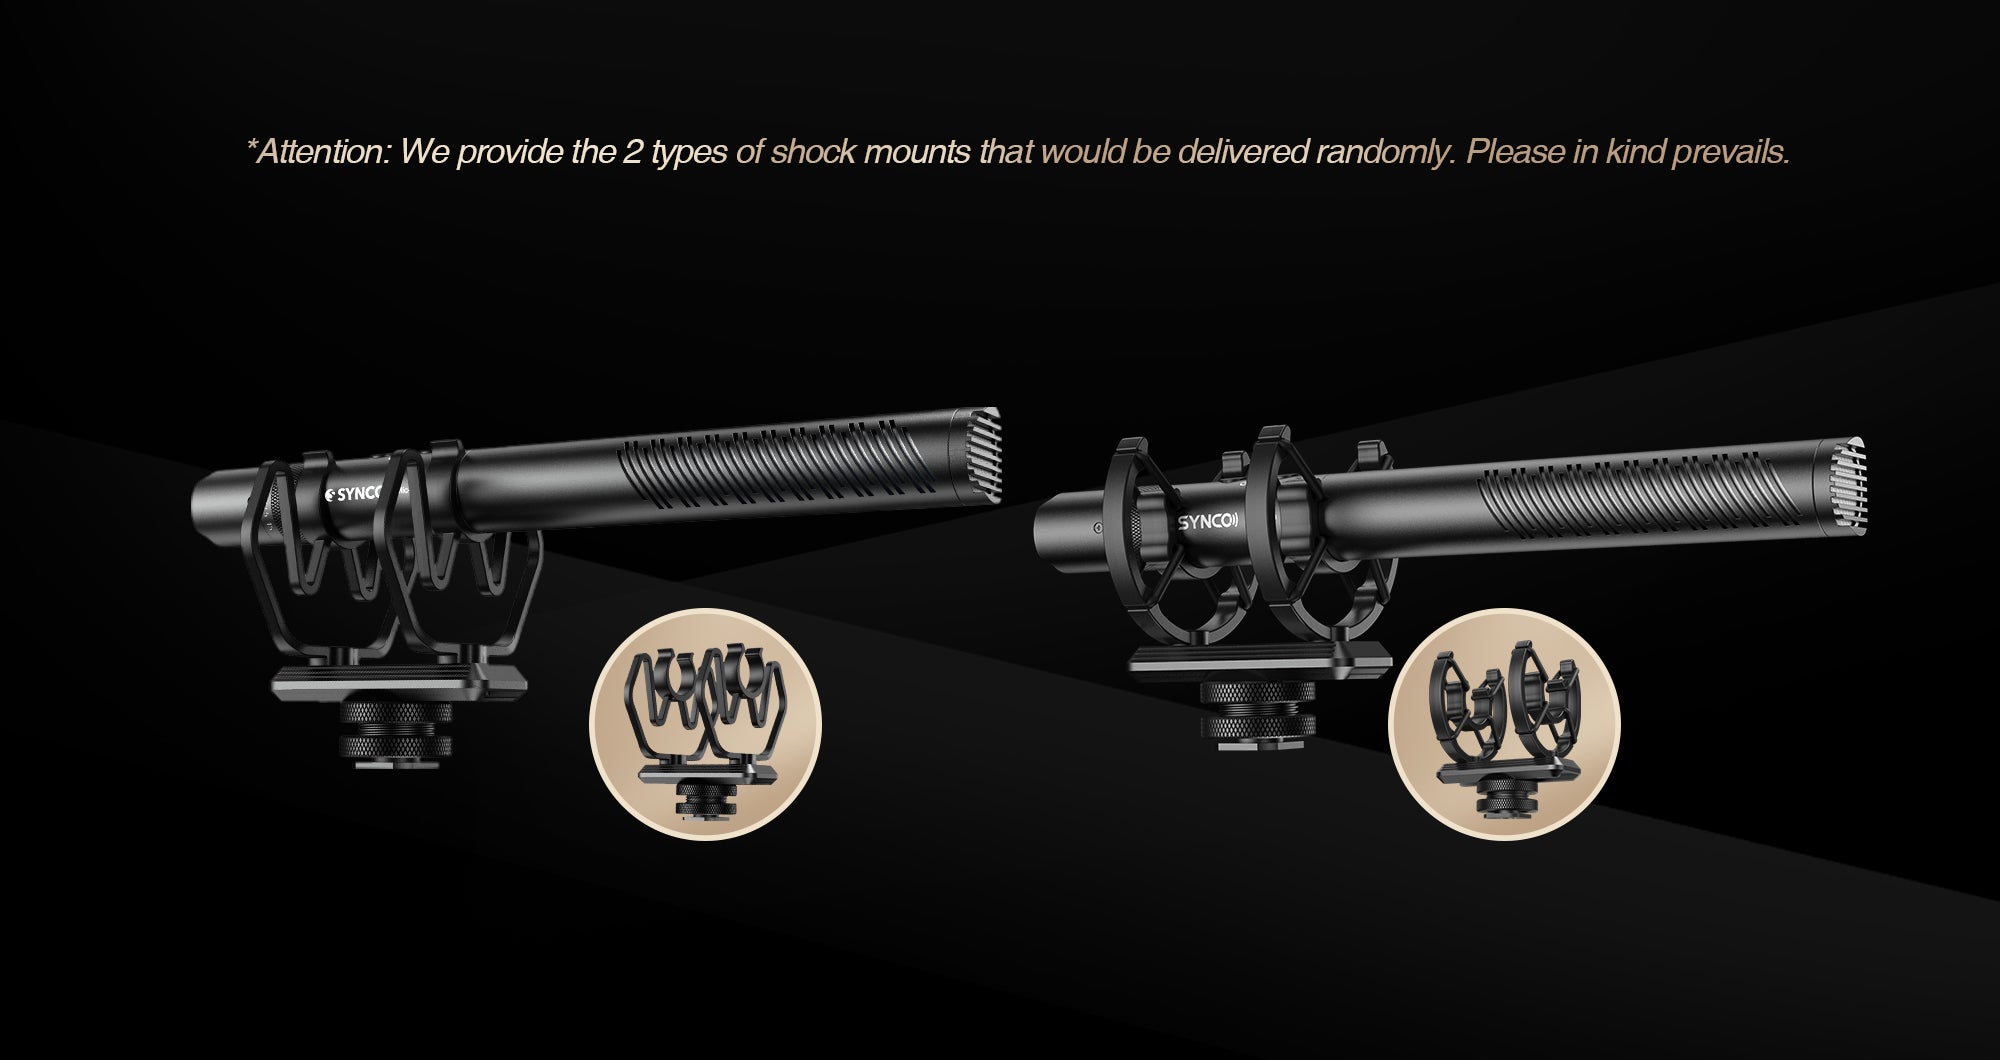 SYNCO D30 shotgun mic camera mount comes in two types and will be delivered randomly.